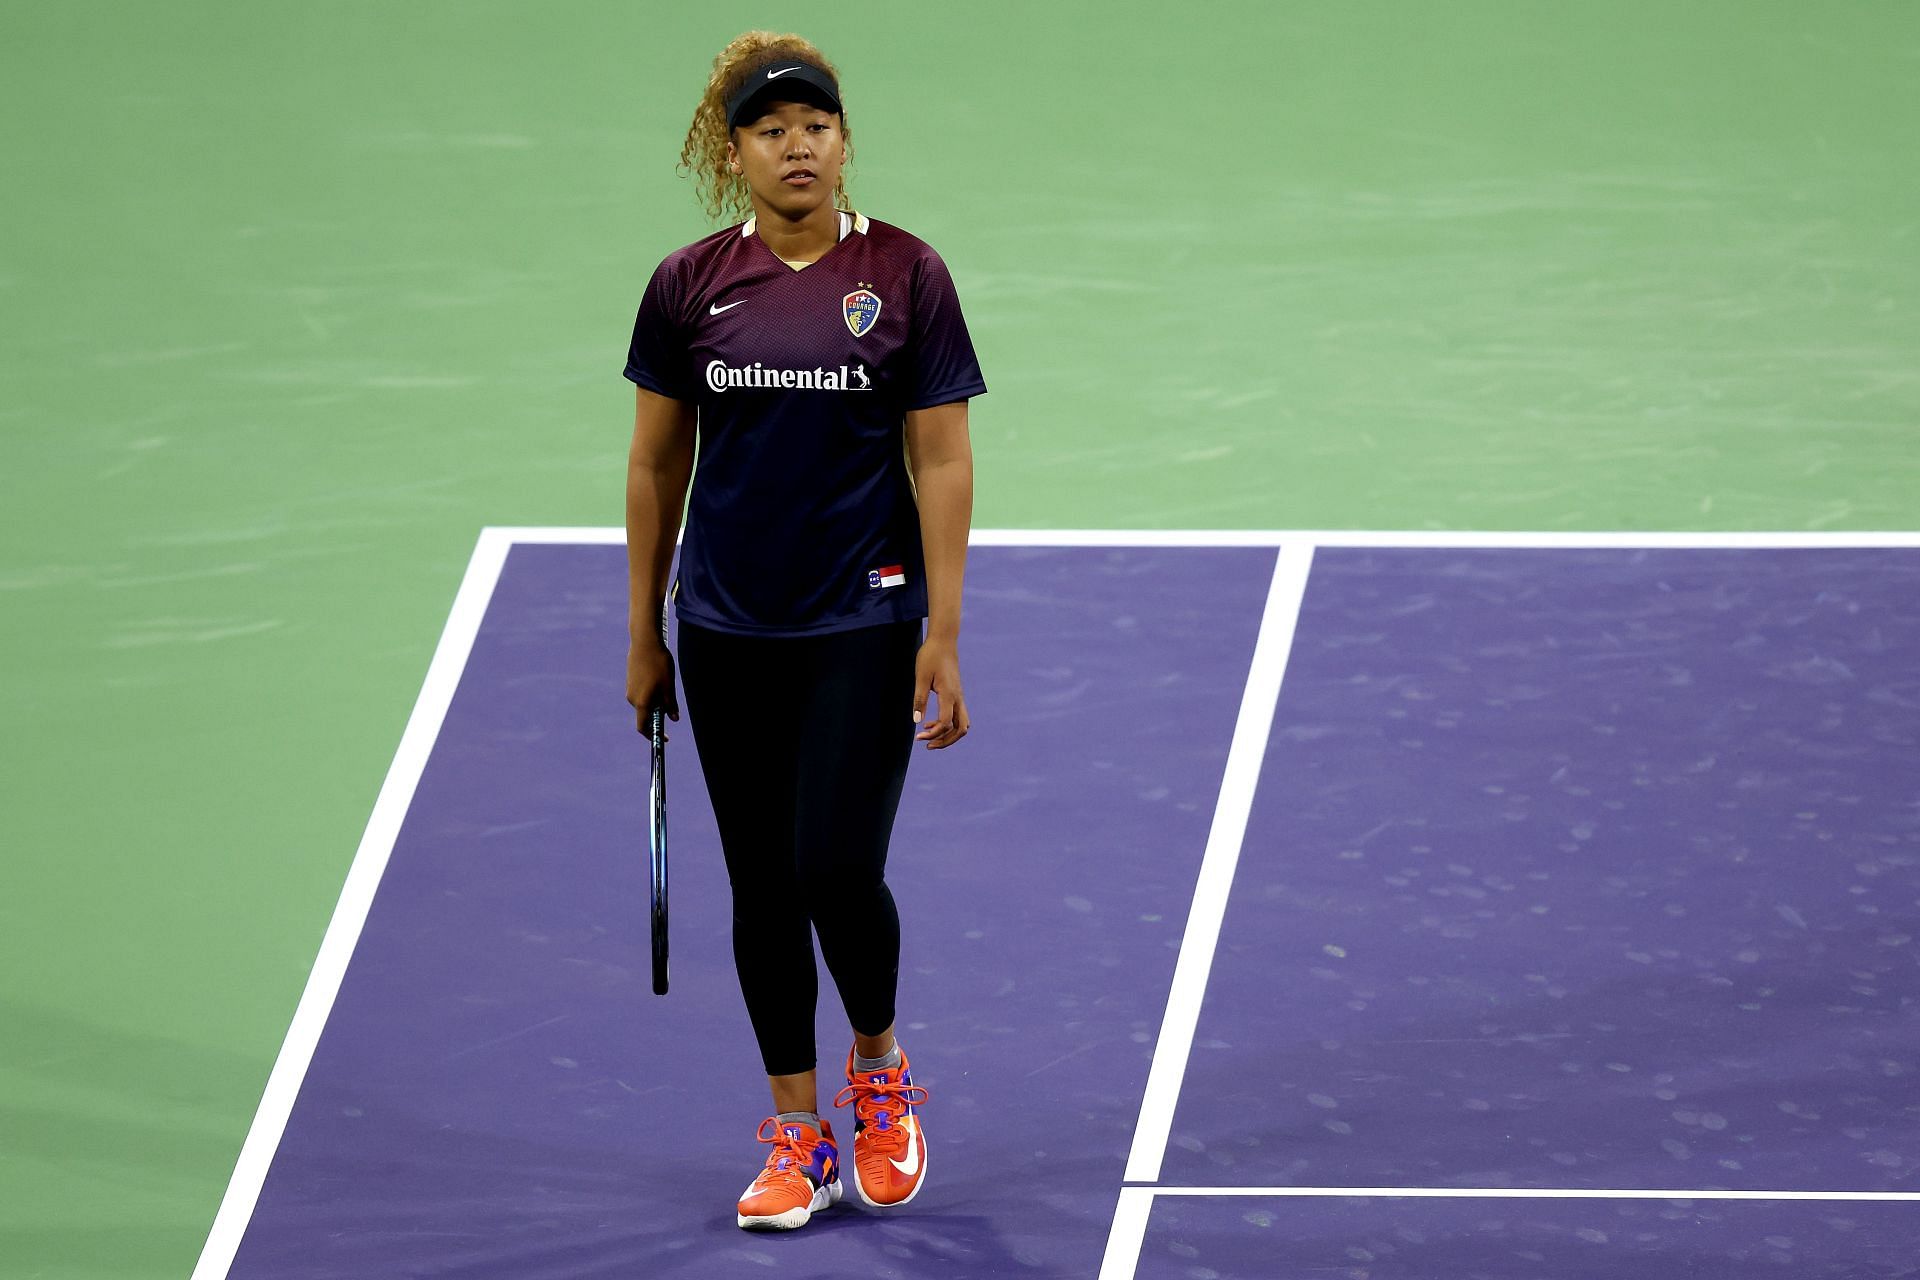 Naomi Osaka wore the jersey of the football club she co-owns